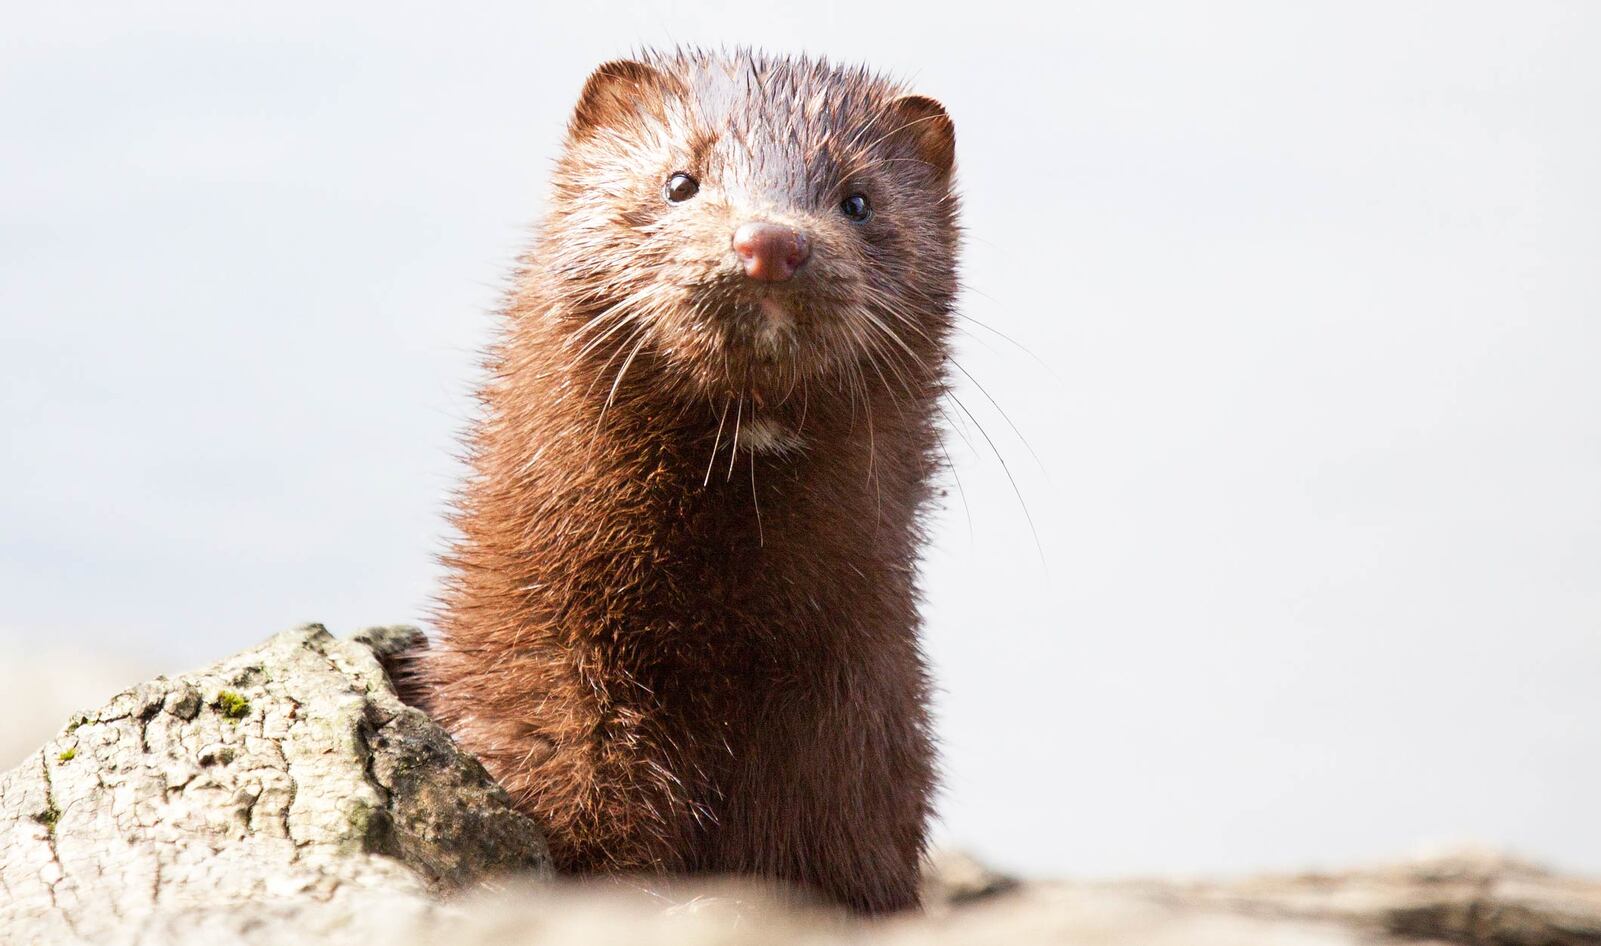 Denmark to Kill Up to 17 Million Mink to Stop Spread of Mutated COVID-19 Virus